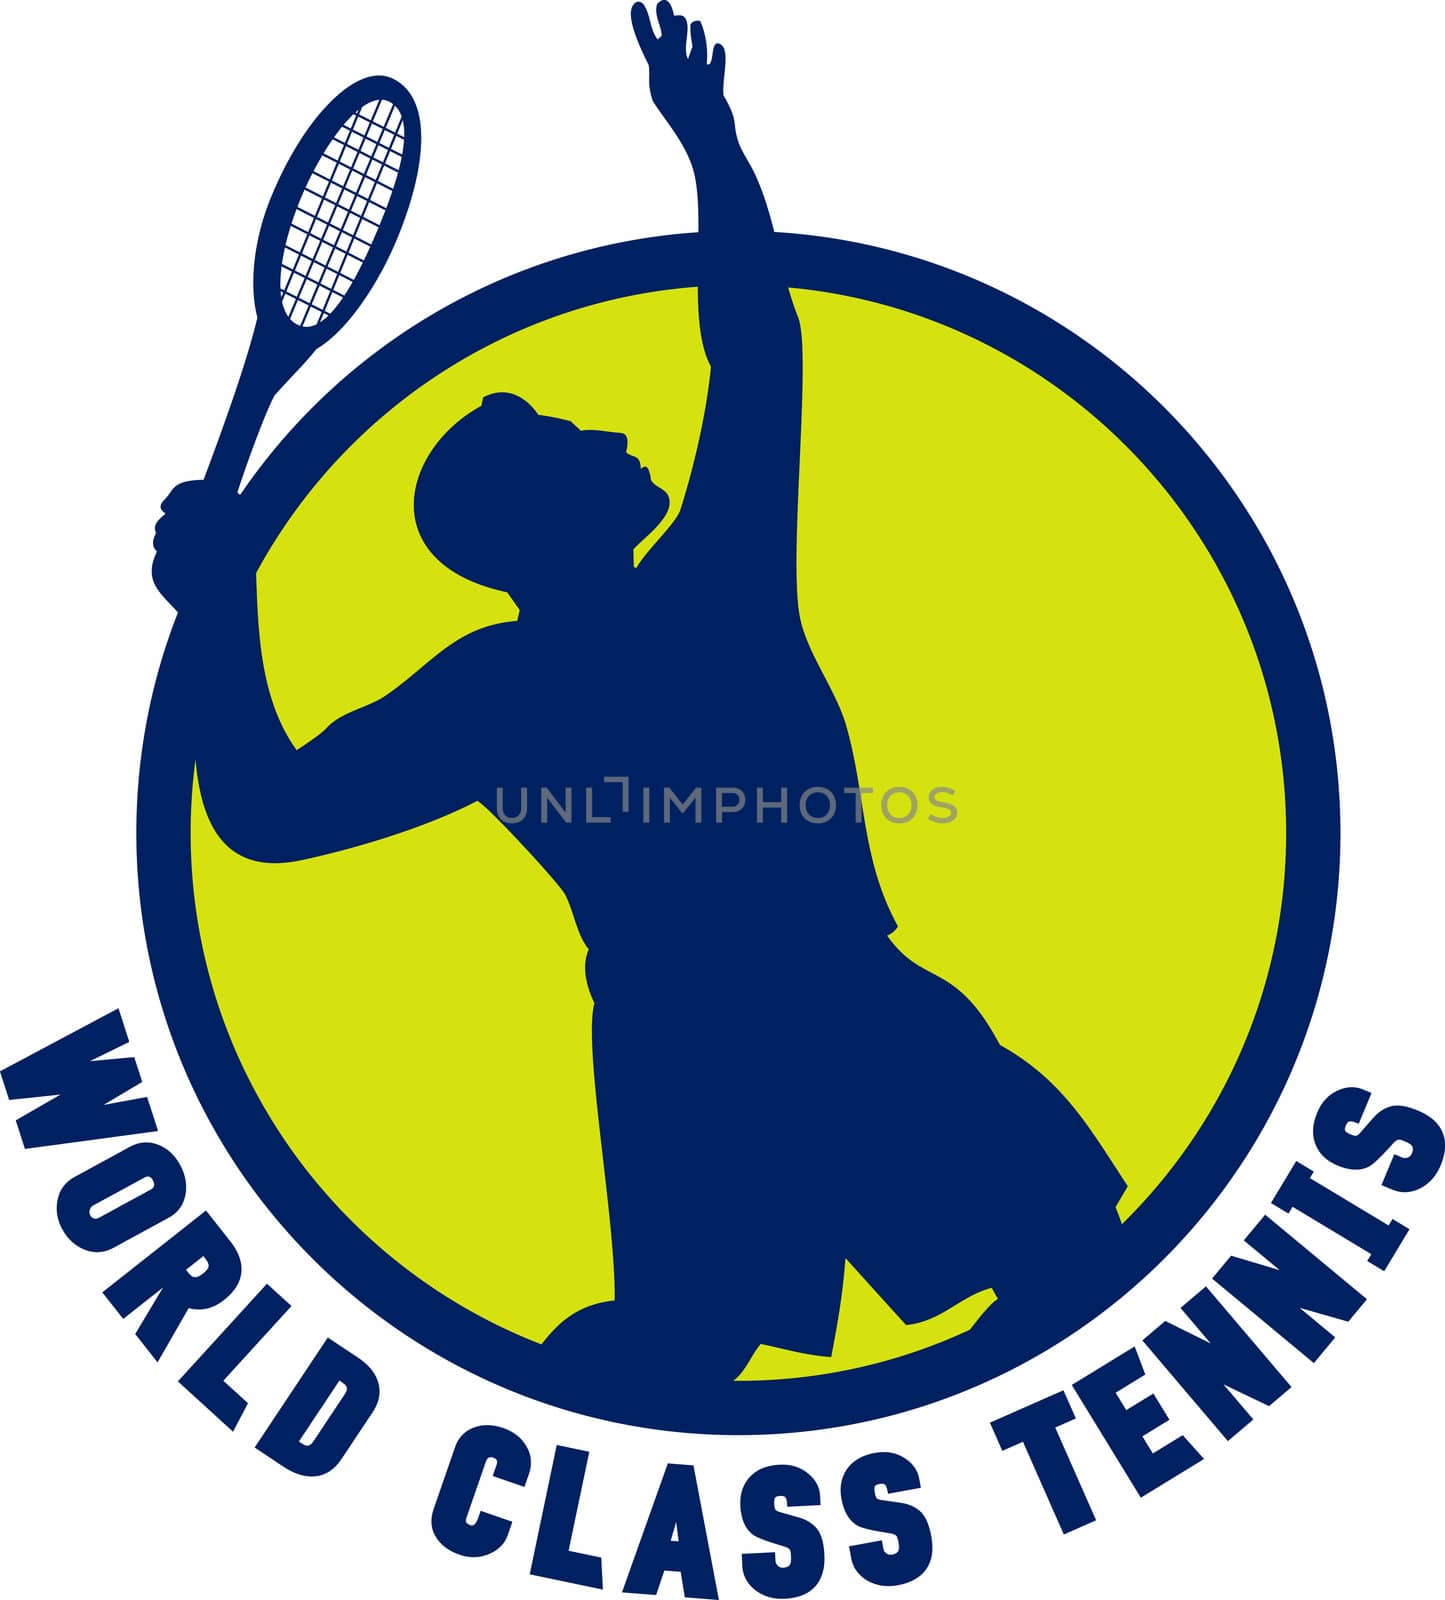 illustration of a tennis player silhouette serving set inside circle with words "world class tennis"